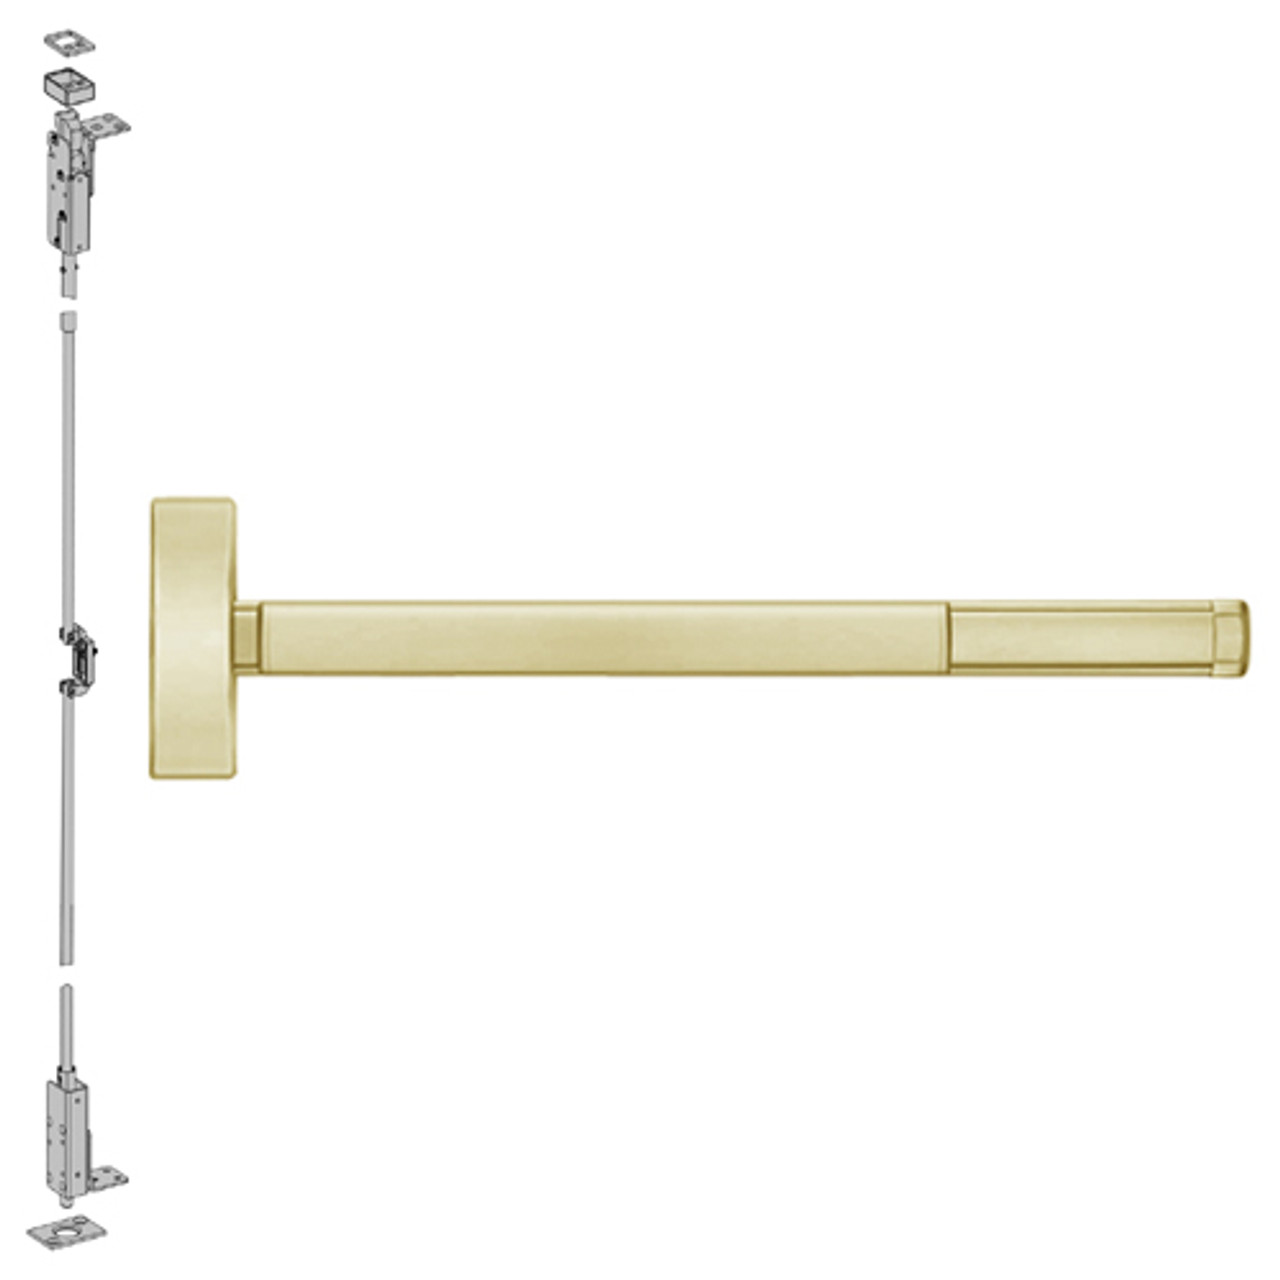 DEFL2702-606-48 PHI 2700 Series Fire Rated Wood Door Concealed Vertical Exit Device with Delayed Egress Prepped for Dummy Trim in Satin Brass Finish